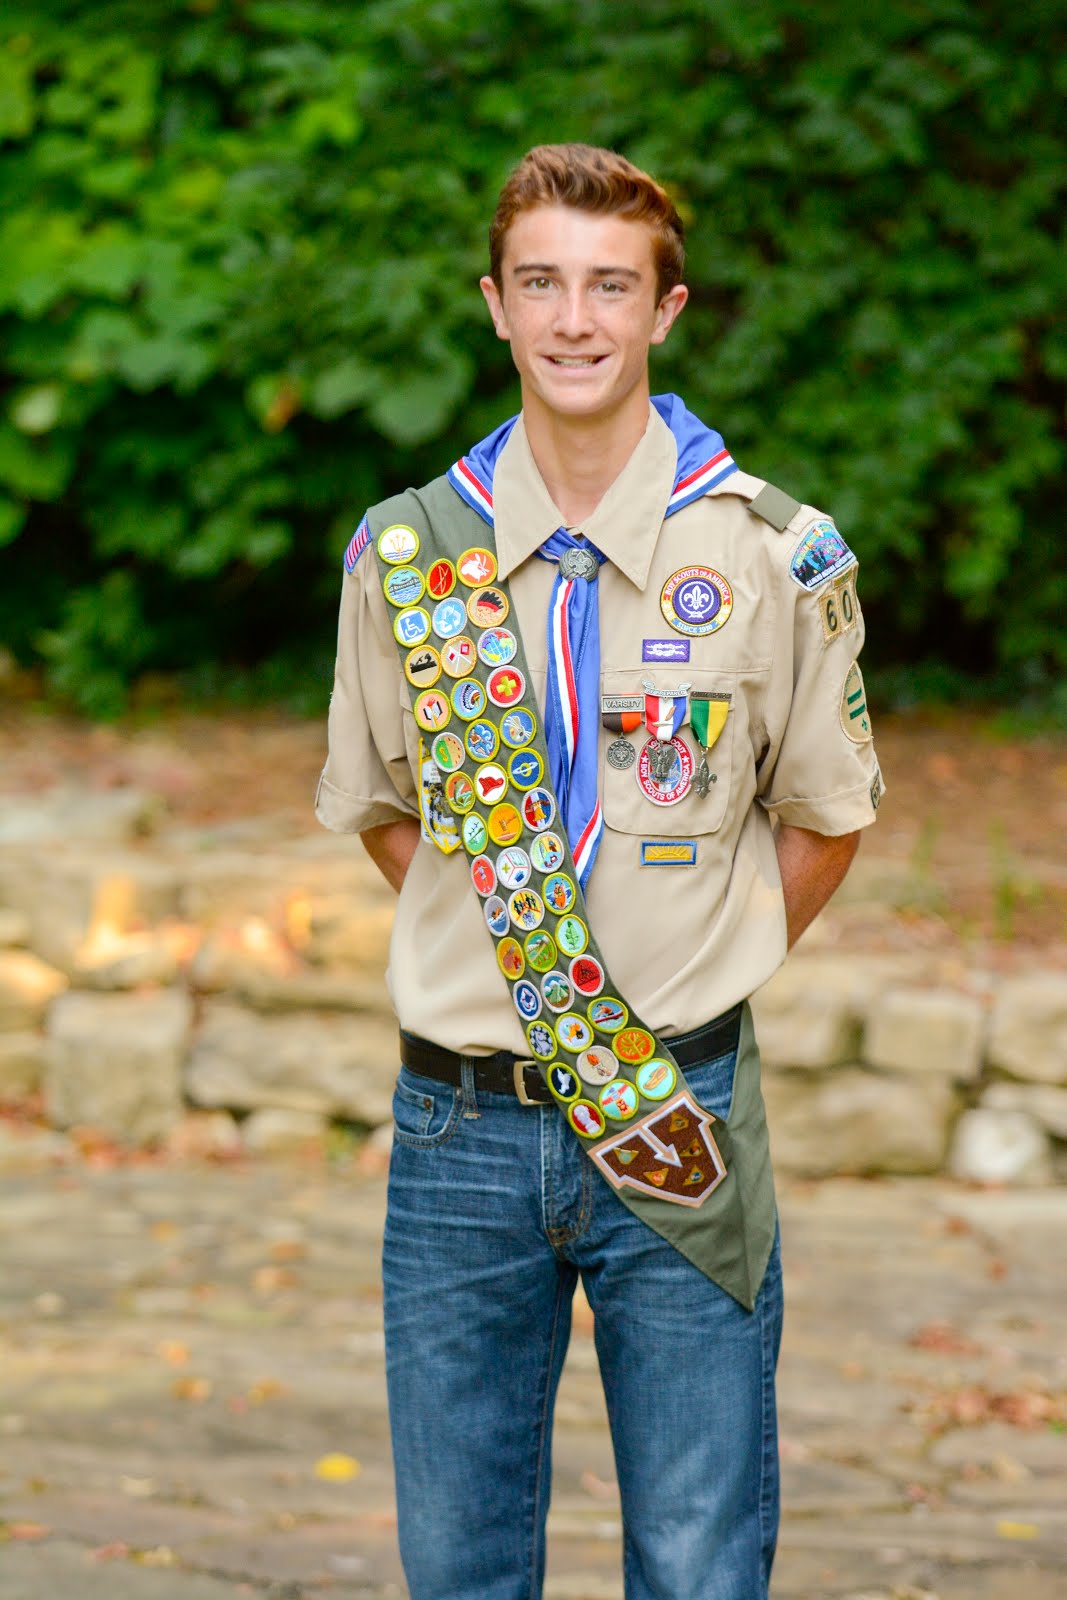 MY EAGLE SCOUT